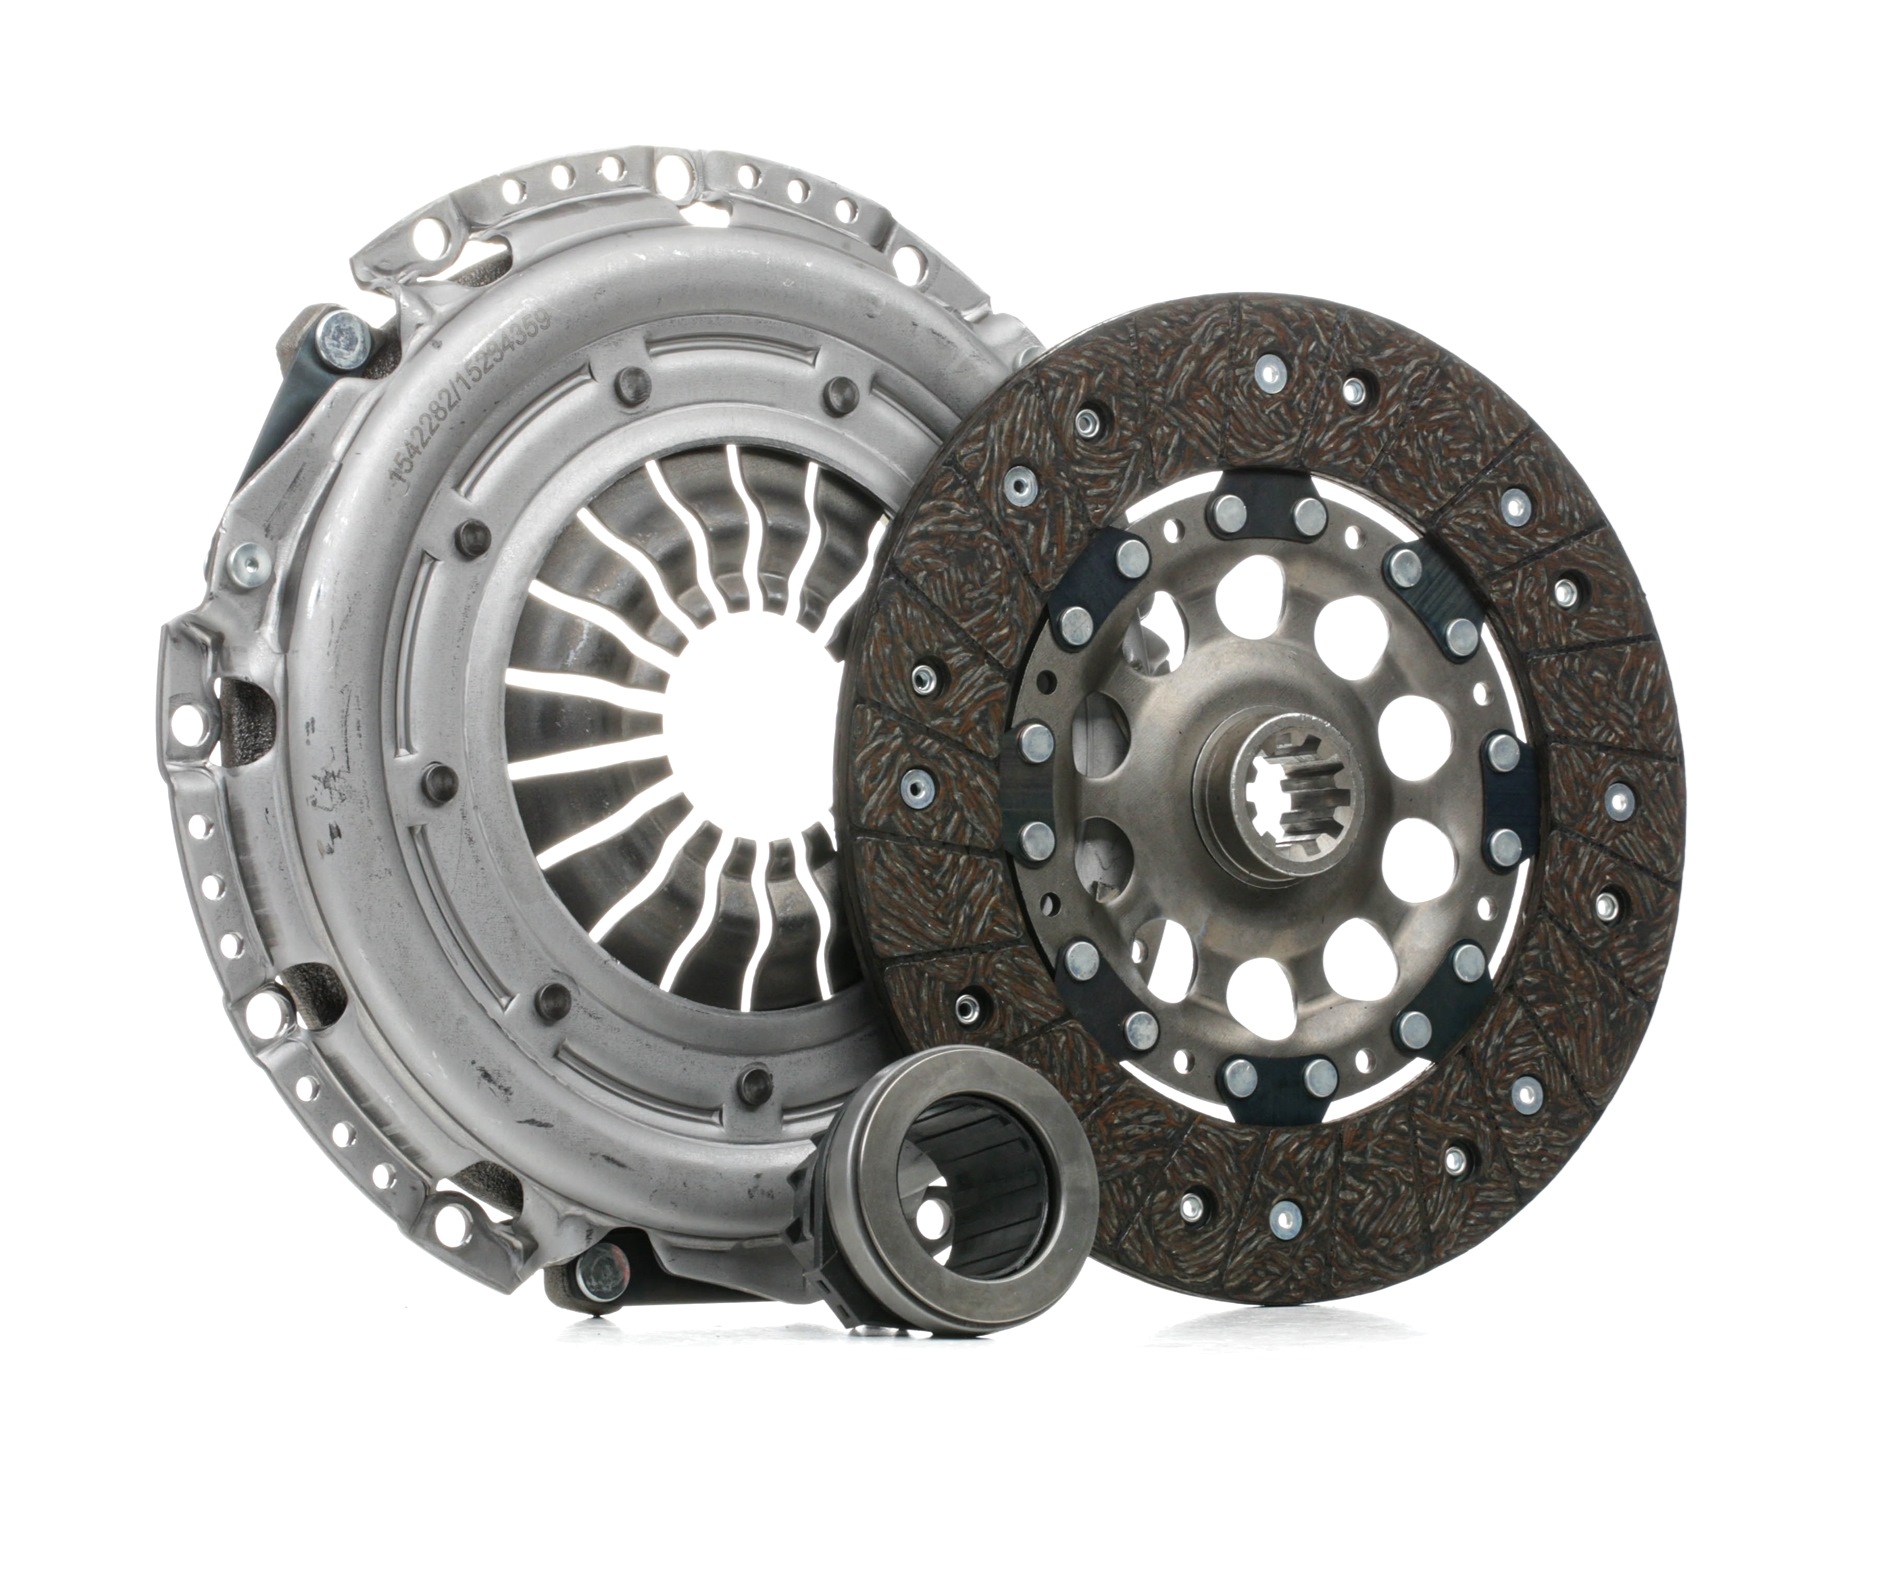 RIDEX 479C0634 Clutch kit for engines with dual-mass flywheel, with clutch pressure plate, with clutch disc, with clutch release bearing, Requires special tools for mounting, Check and replace dual-mass flywheel if necessary., with automatic adjustment, 240mm